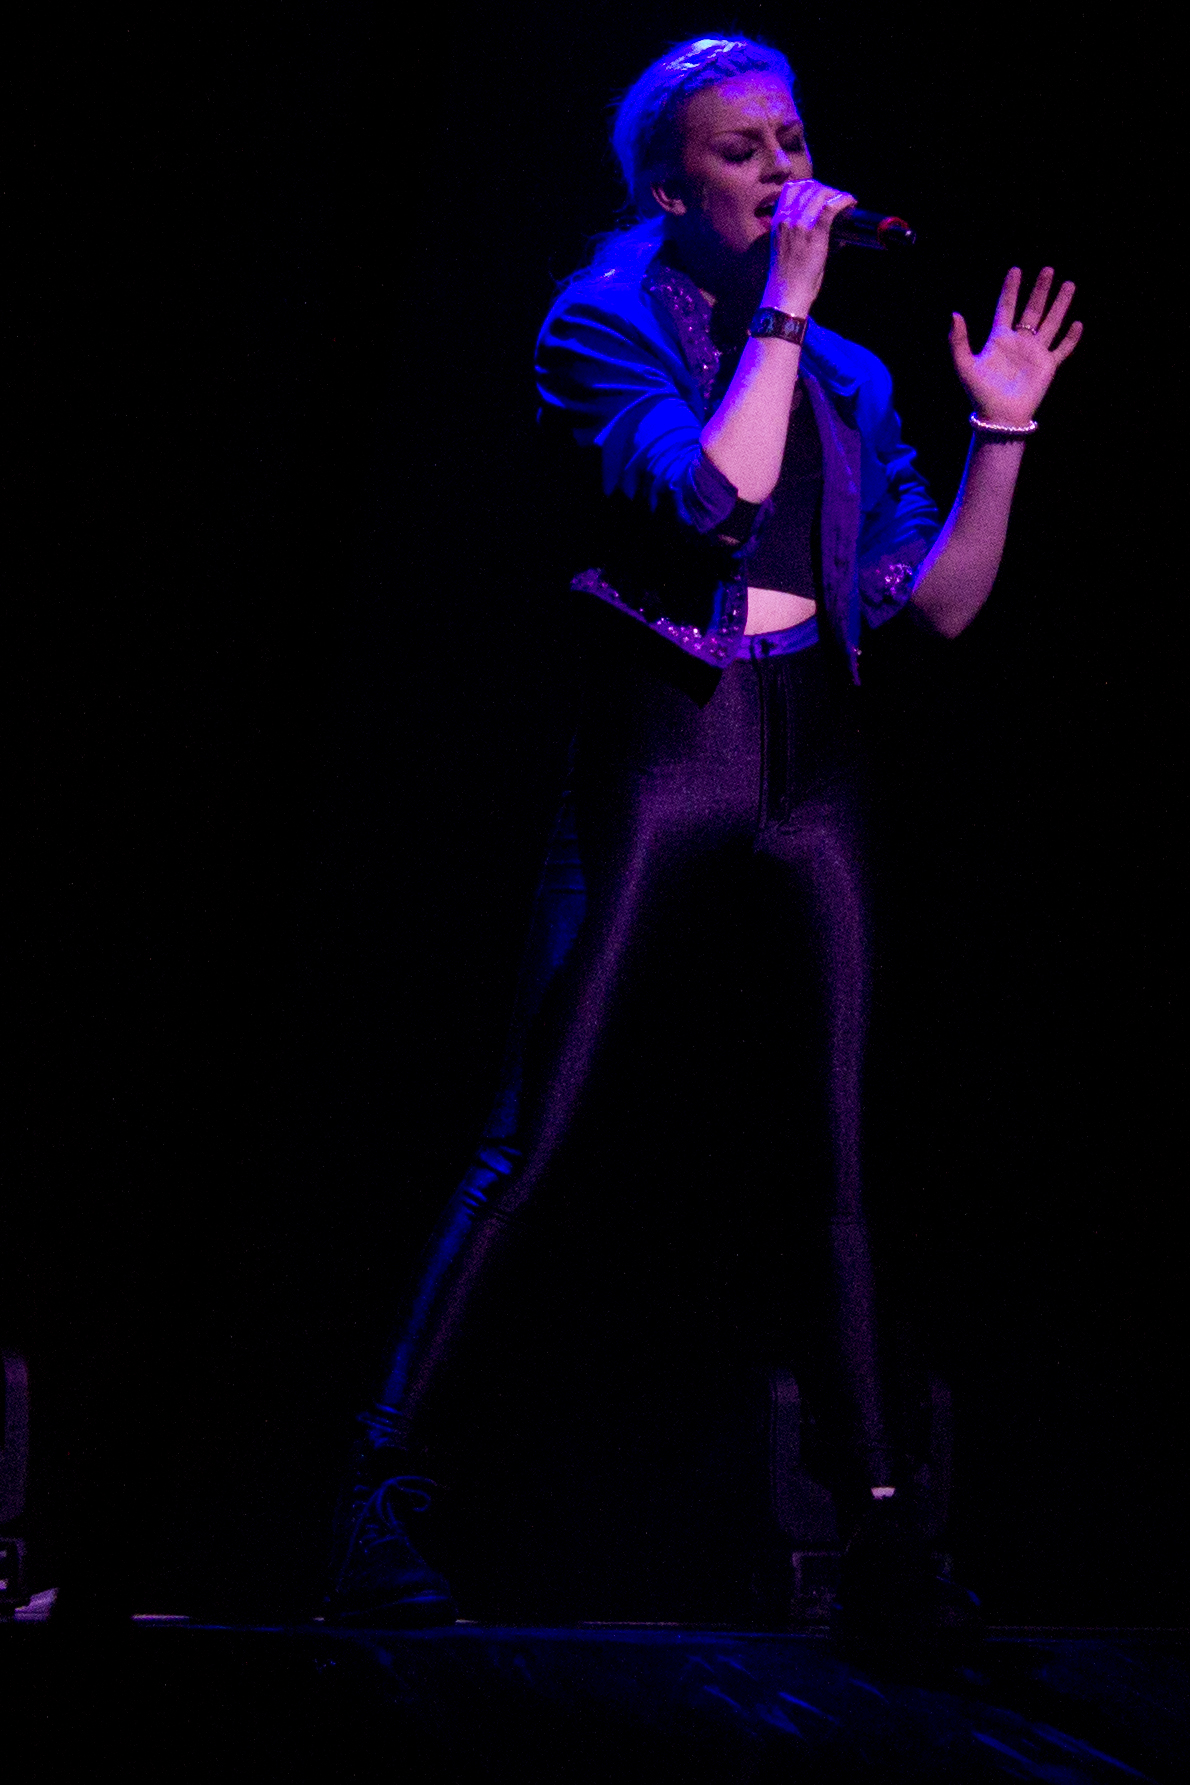 the woman is singing into a microphone with her hand up